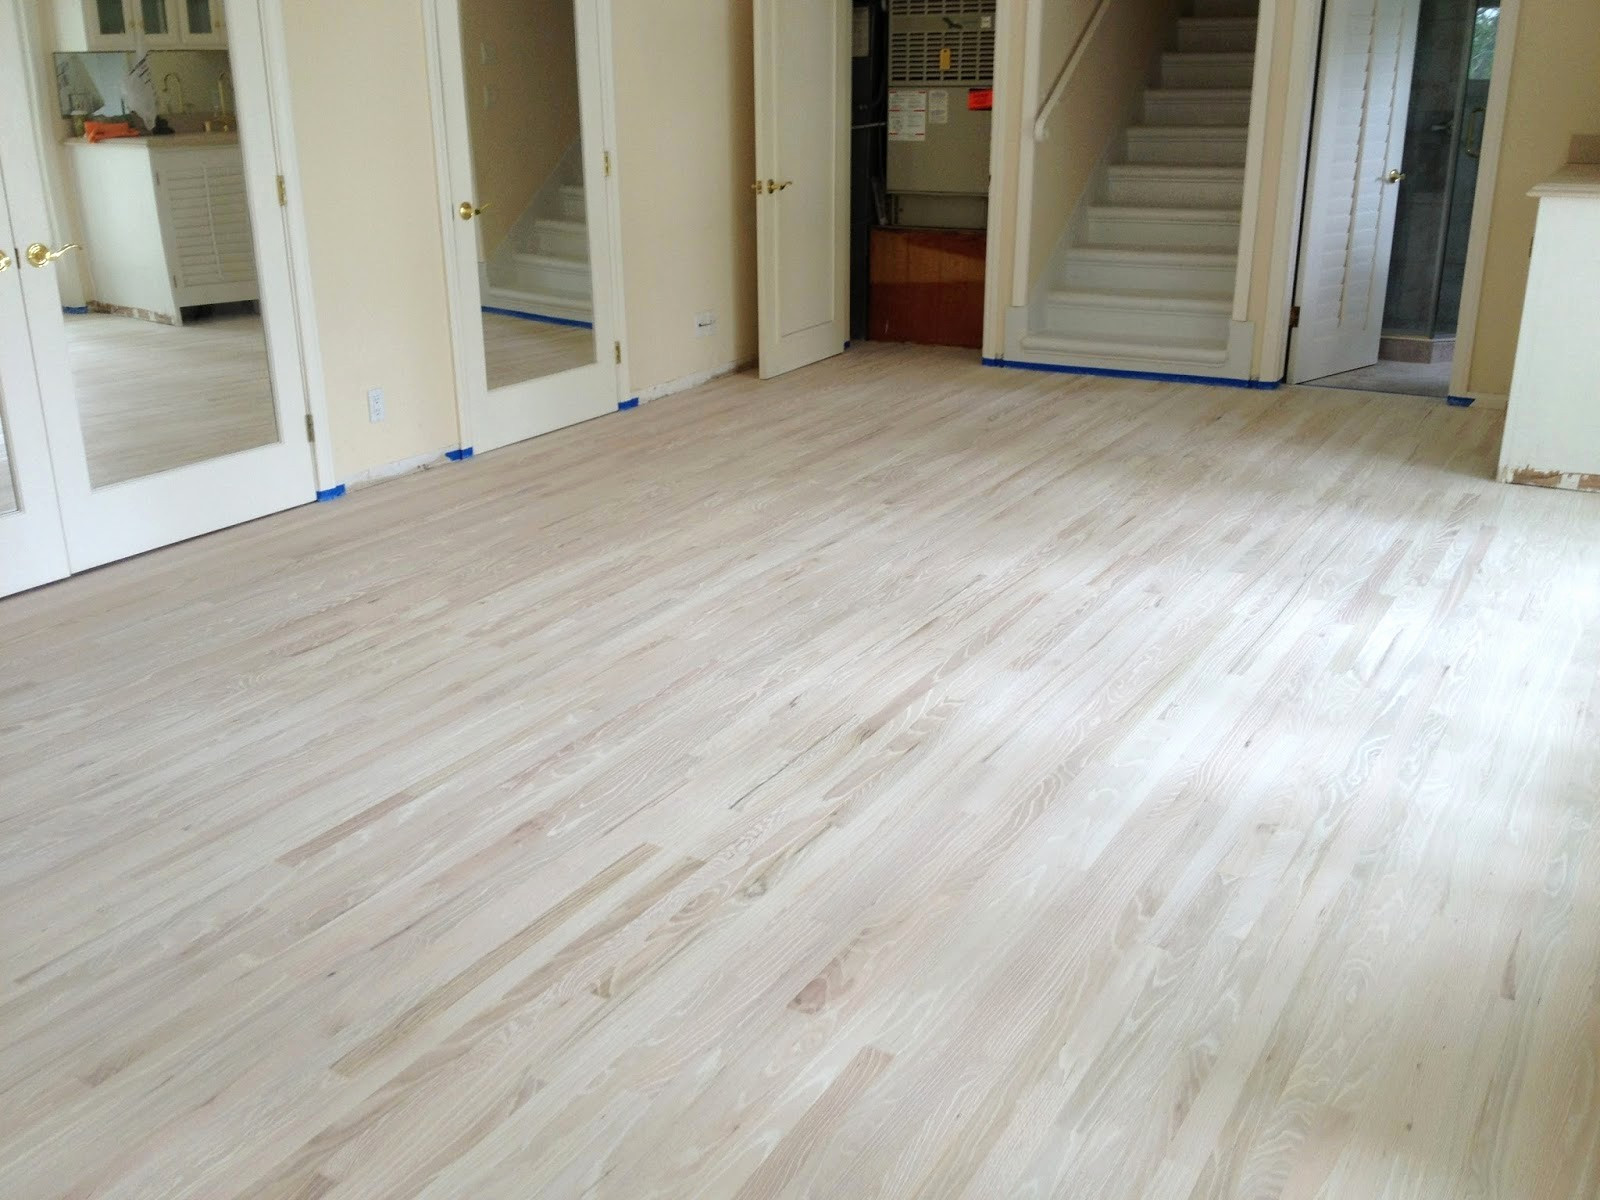 11 Stylish How Much Does Refinishing A Hardwood Floor Cost 2024 free download how much does refinishing a hardwood floor cost of 19 unique how much does it cost to refinish hardwood floors gallery intended for how much does it cost to refinish hardwood floors best of 